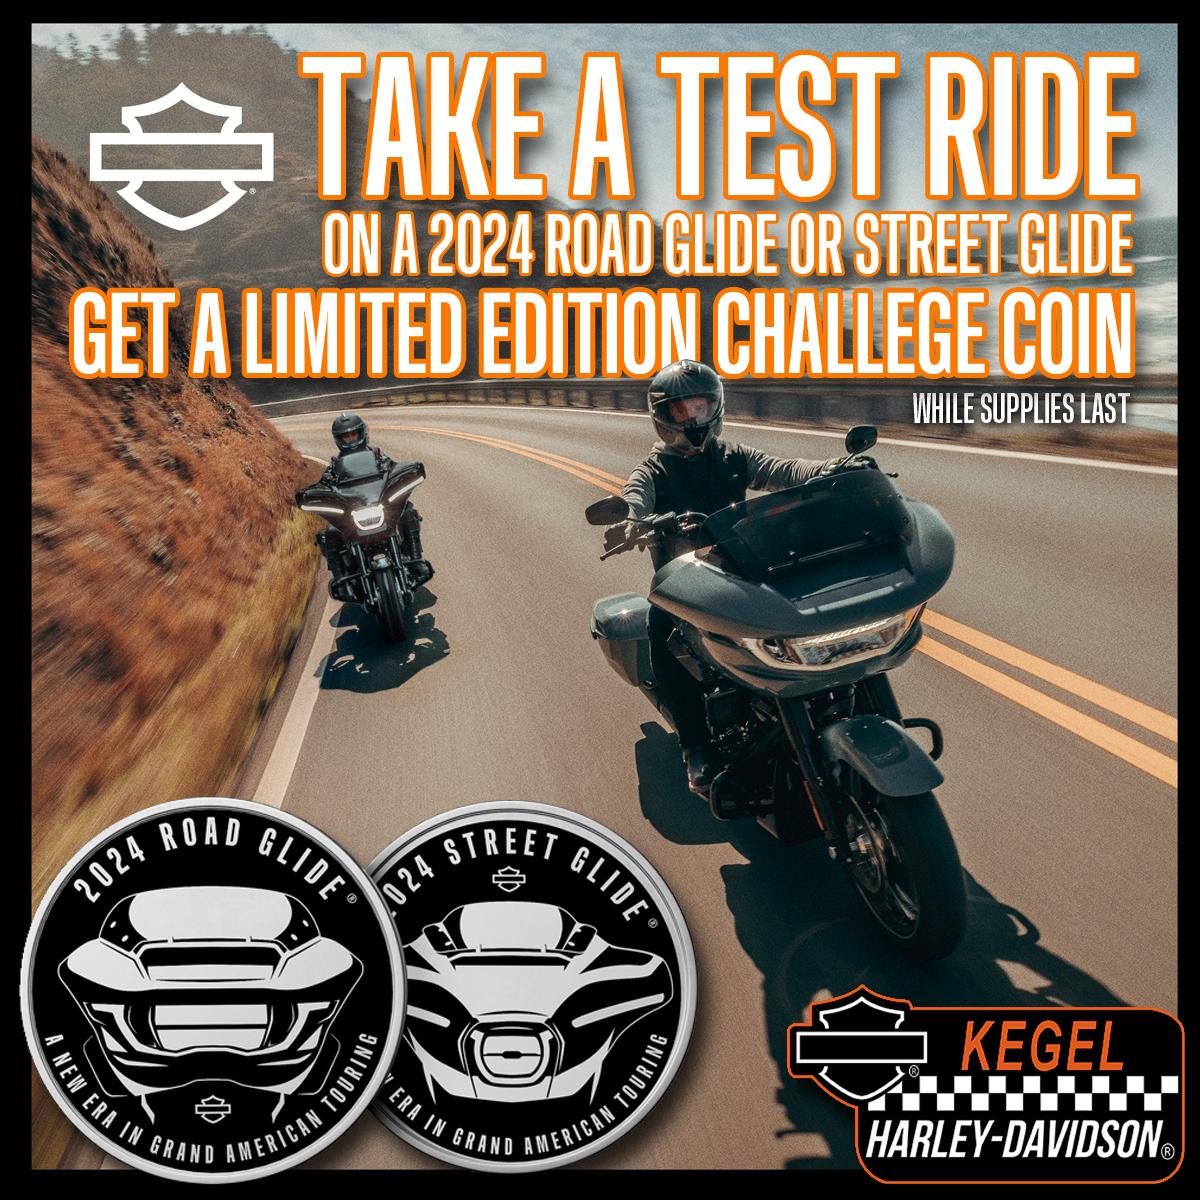 🏍️Test ride the ALL-NEW 2024 Street Glide or Road Glide at #KegelHD and snag yourself a limited edition challenge coin! 🏍️

But hurry - supplies are limited!

#harleydavidson #harleydavidsonmotorcycles #takeatestride #streetglide #roadglide